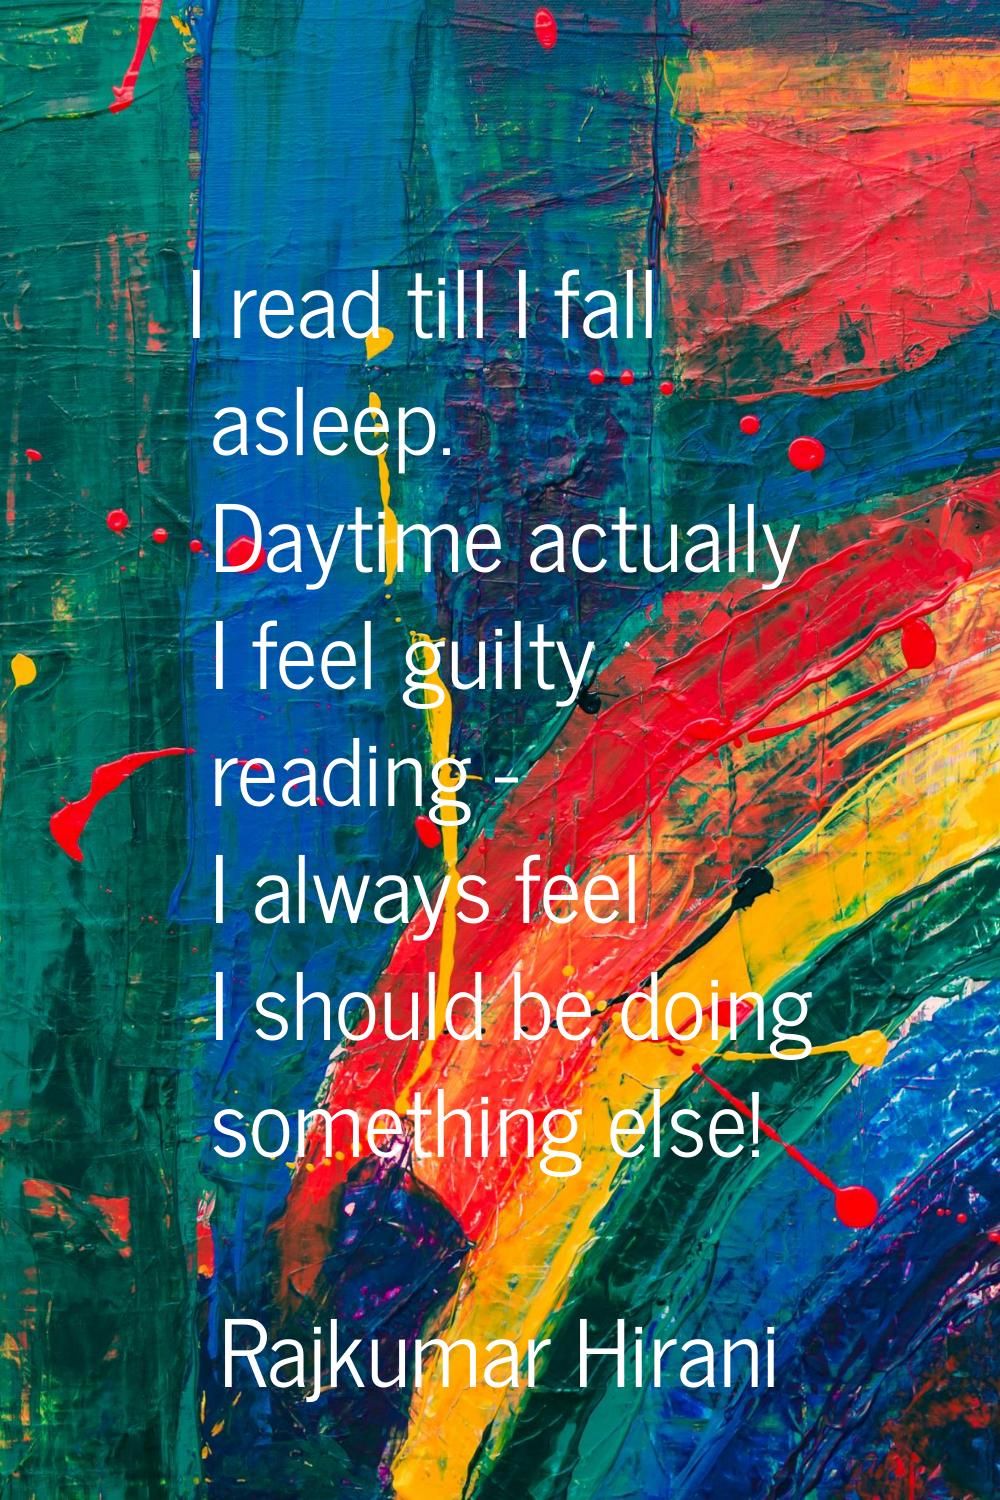 I read till I fall asleep. Daytime actually I feel guilty reading - I always feel I should be doing